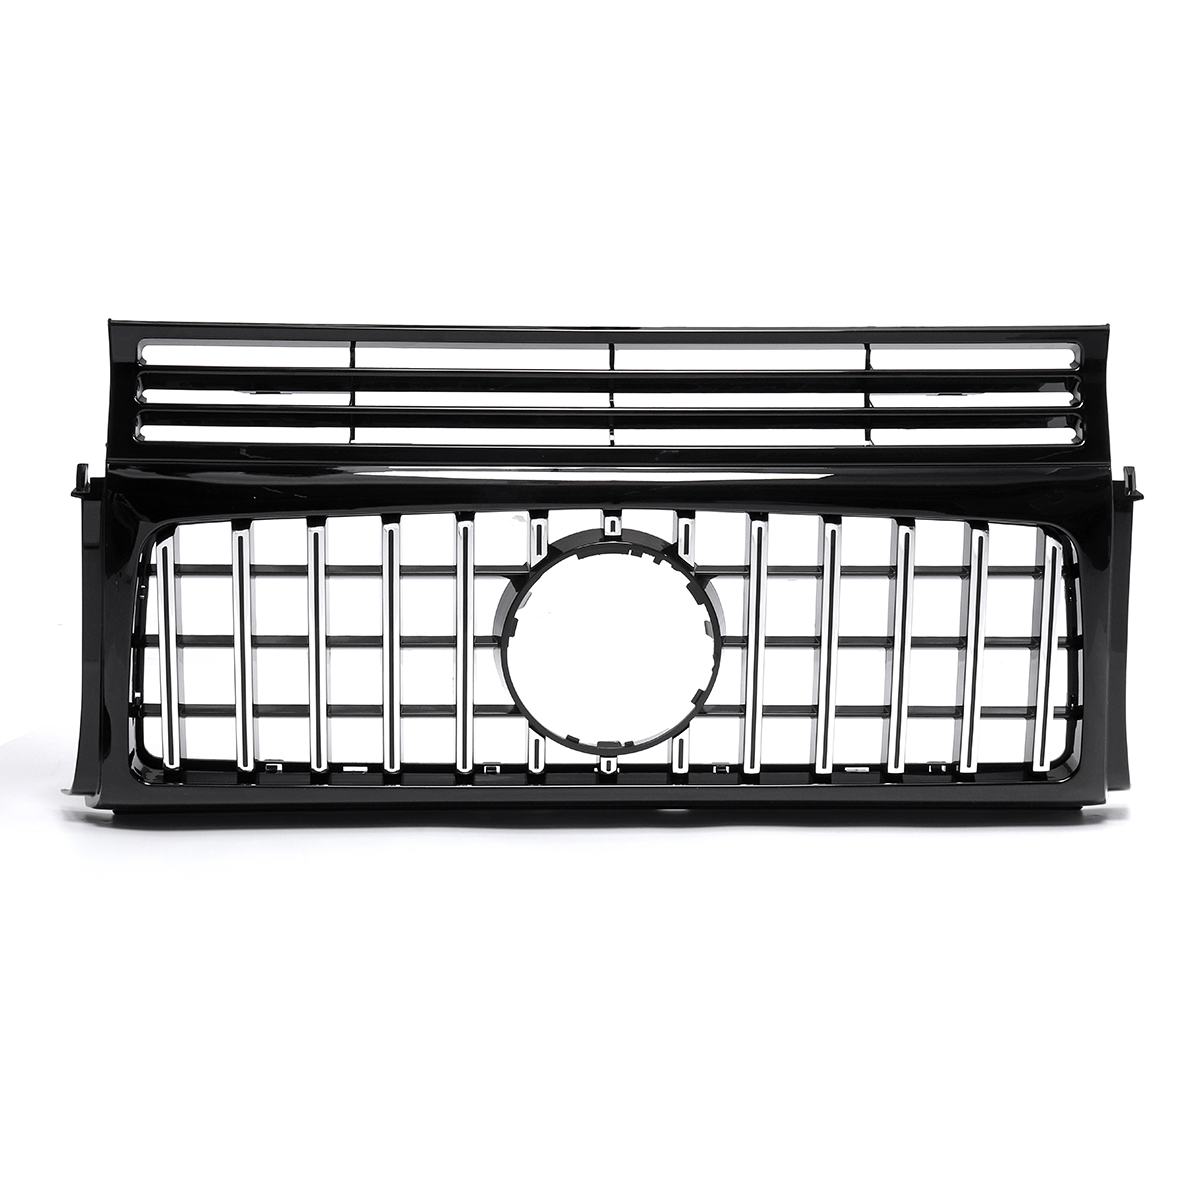 

Universal Black For AMG Mercedes W463 GTR Grille G Wagon 550 G500 G350 G55 G63 Front 1990-2017